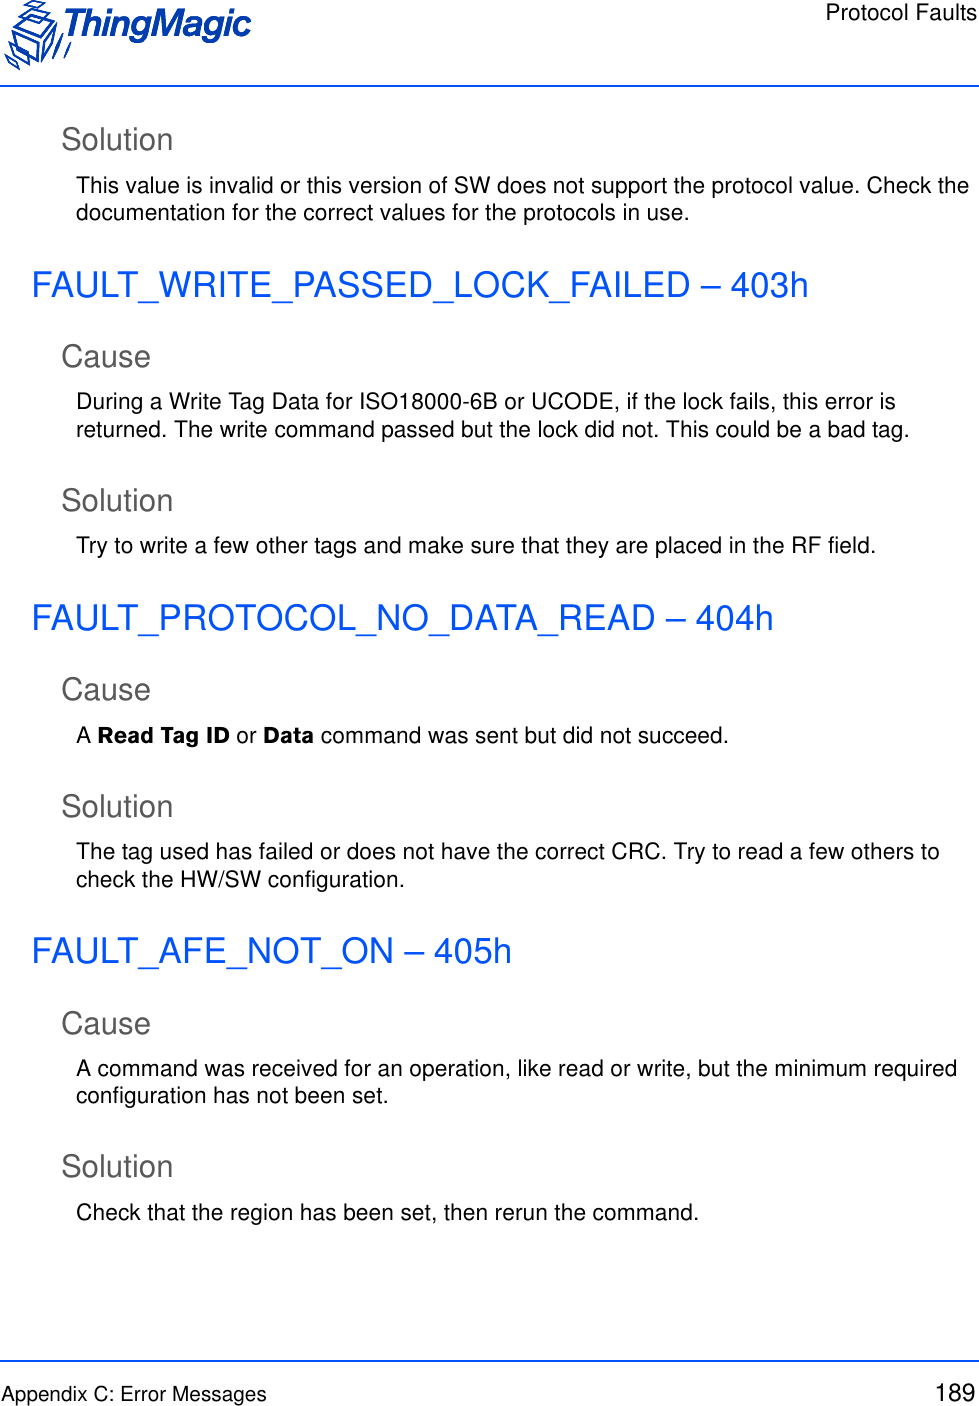 Protocol FaultsAppendix C: Error Messages 189SolutionThis value is invalid or this version of SW does not support the protocol value. Check the documentation for the correct values for the protocols in use.FAULT_WRITE_PASSED_LOCK_FAILED – 403hCauseDuring a Write Tag Data for ISO18000-6B or UCODE, if the lock fails, this error is returned. The write command passed but the lock did not. This could be a bad tag.SolutionTry to write a few other tags and make sure that they are placed in the RF field.FAULT_PROTOCOL_NO_DATA_READ – 404hCauseA Read Tag ID or Data command was sent but did not succeed.SolutionThe tag used has failed or does not have the correct CRC. Try to read a few others to check the HW/SW configuration.FAULT_AFE_NOT_ON – 405hCauseA command was received for an operation, like read or write, but the minimum required configuration has not been set.SolutionCheck that the region has been set, then rerun the command.